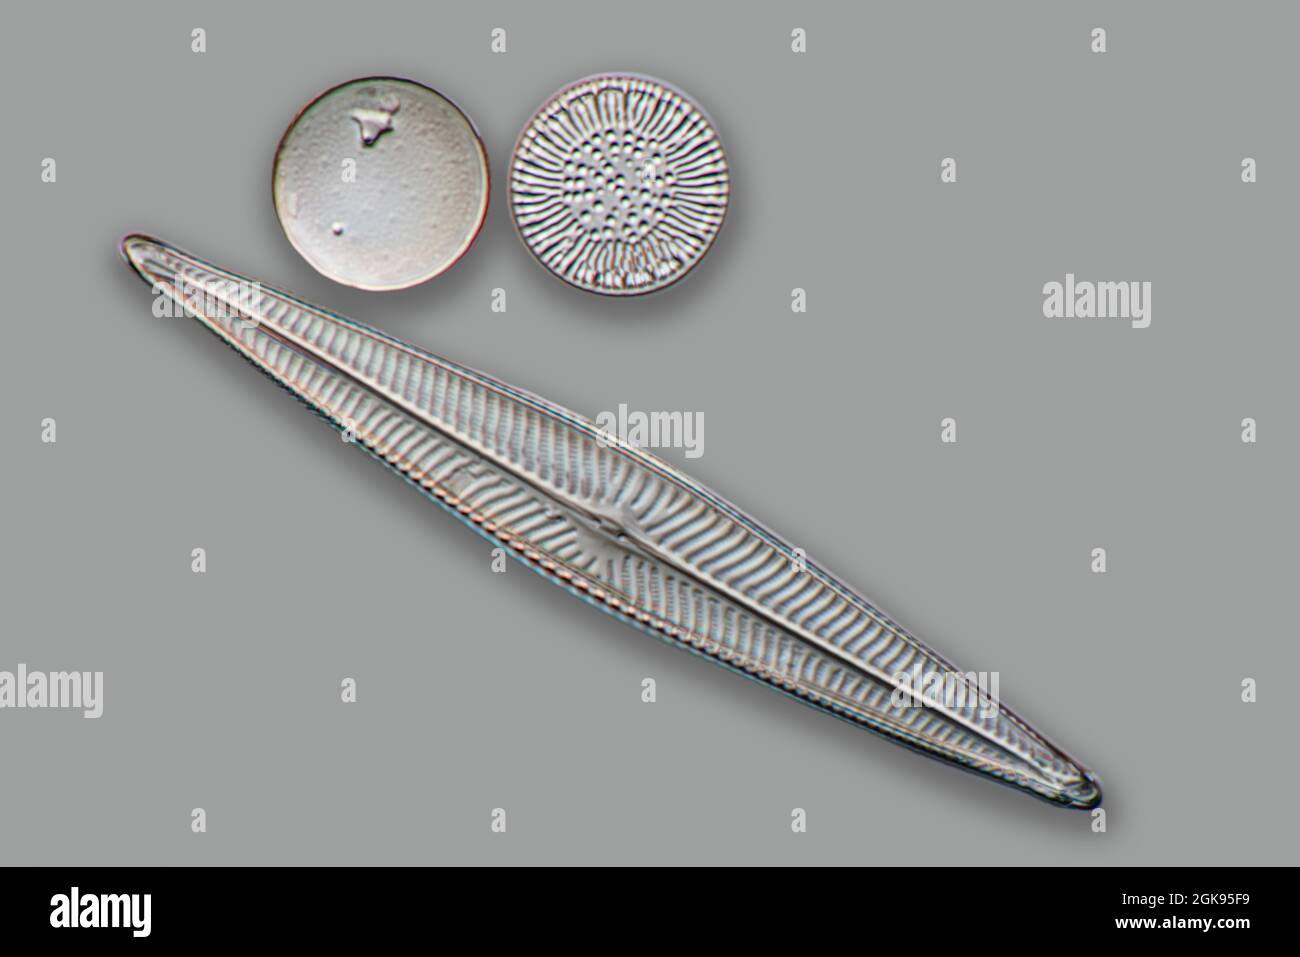 diatom (Diatomeae), diatoms of Marienwerden, Differential interference contrast microscopy, magnification x 140 related to a print of 35 mm, Germany, Stock Photo